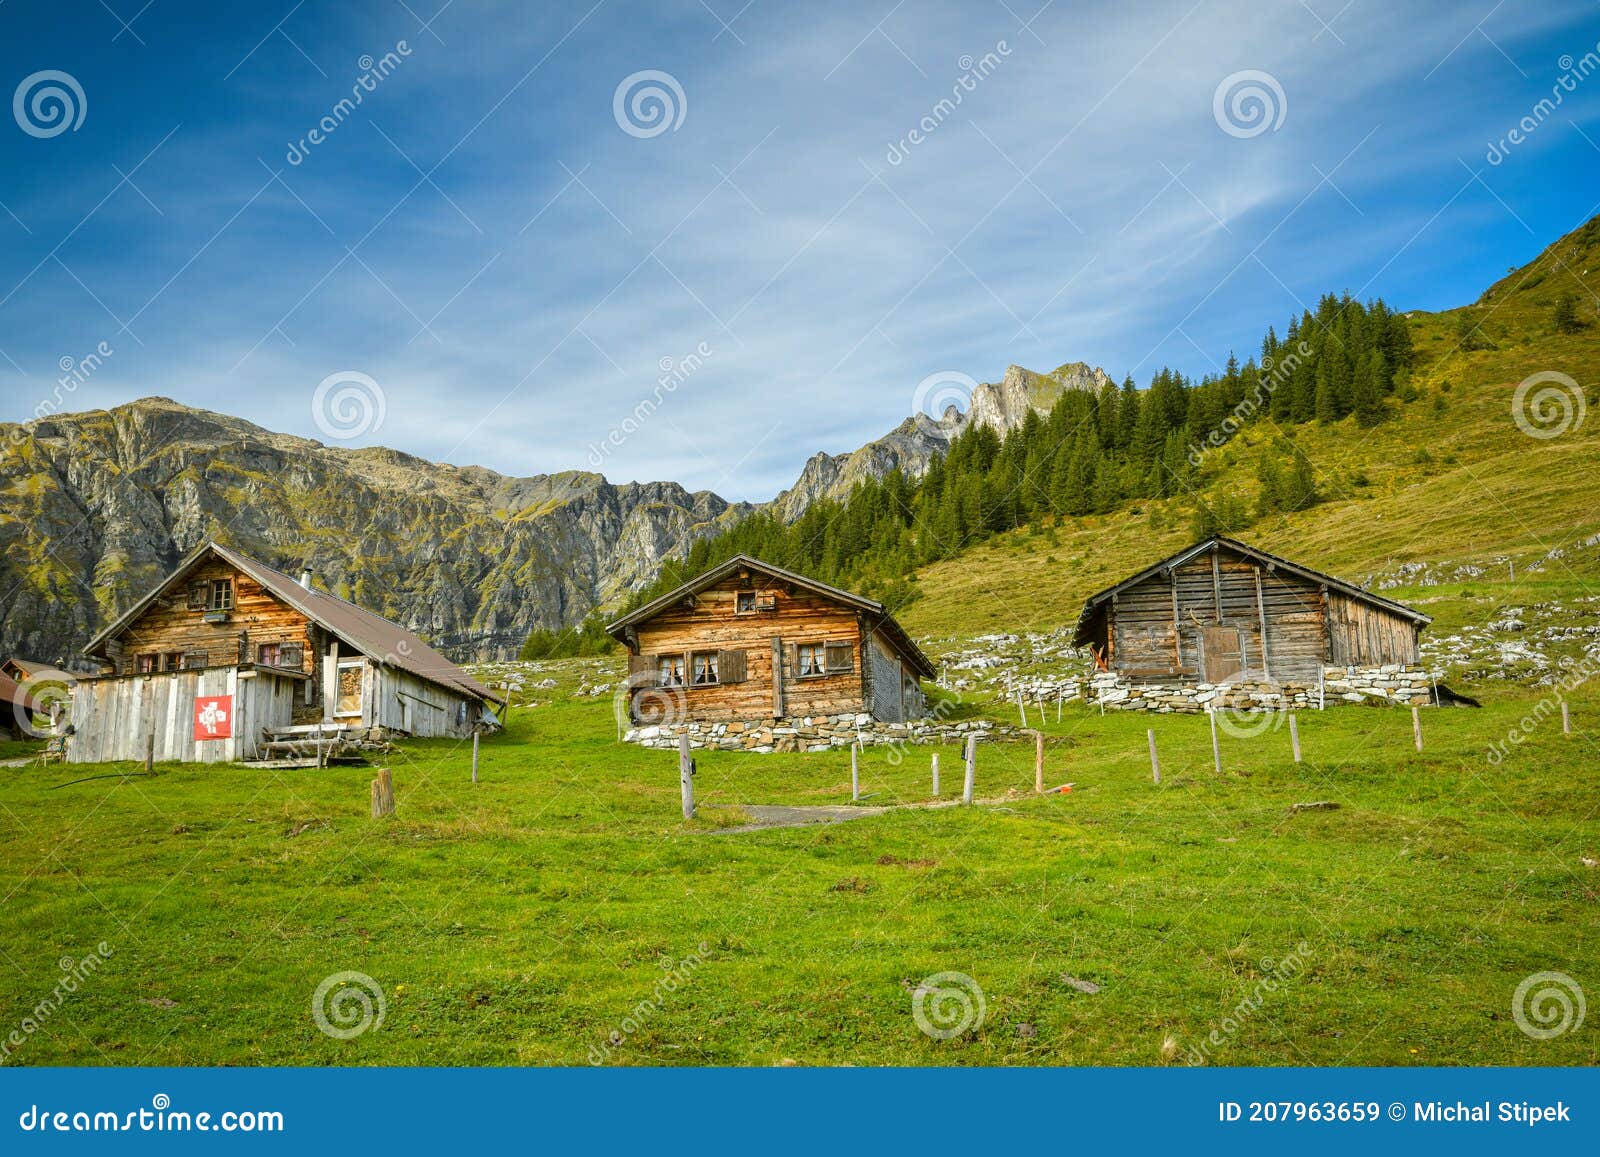 Small Wooden Houses 